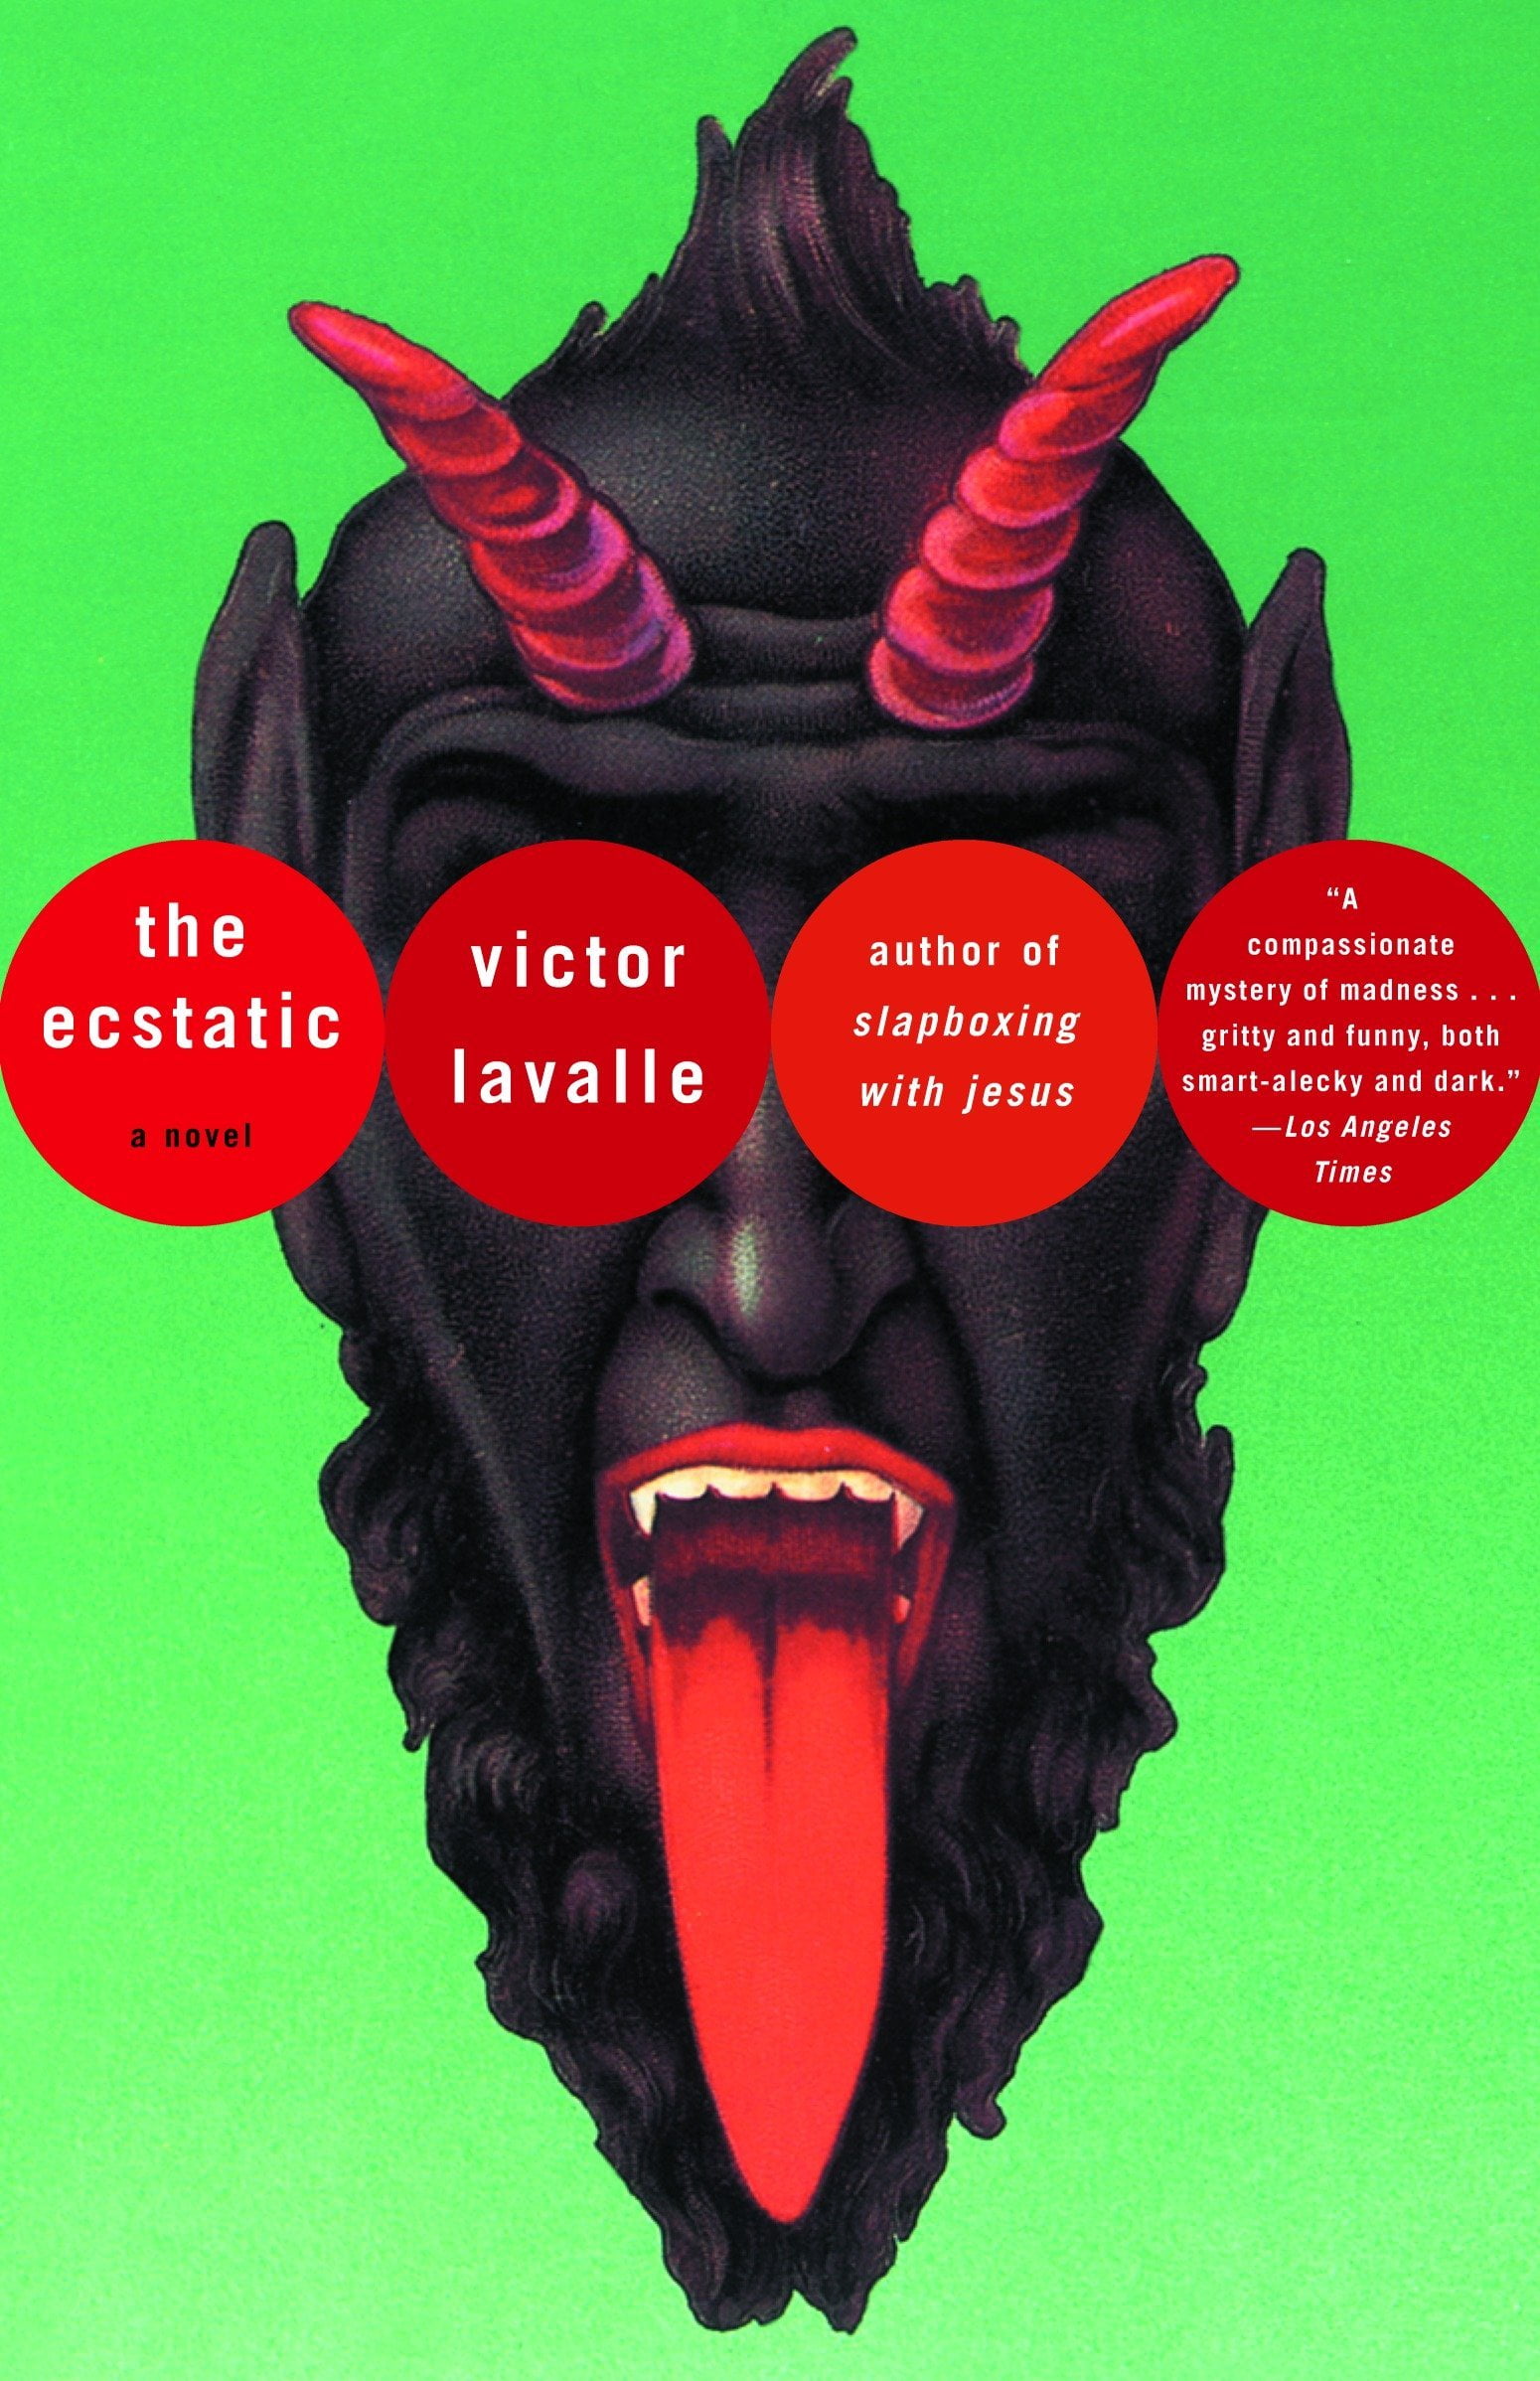 “The Ecstatic” – Victor LaValle